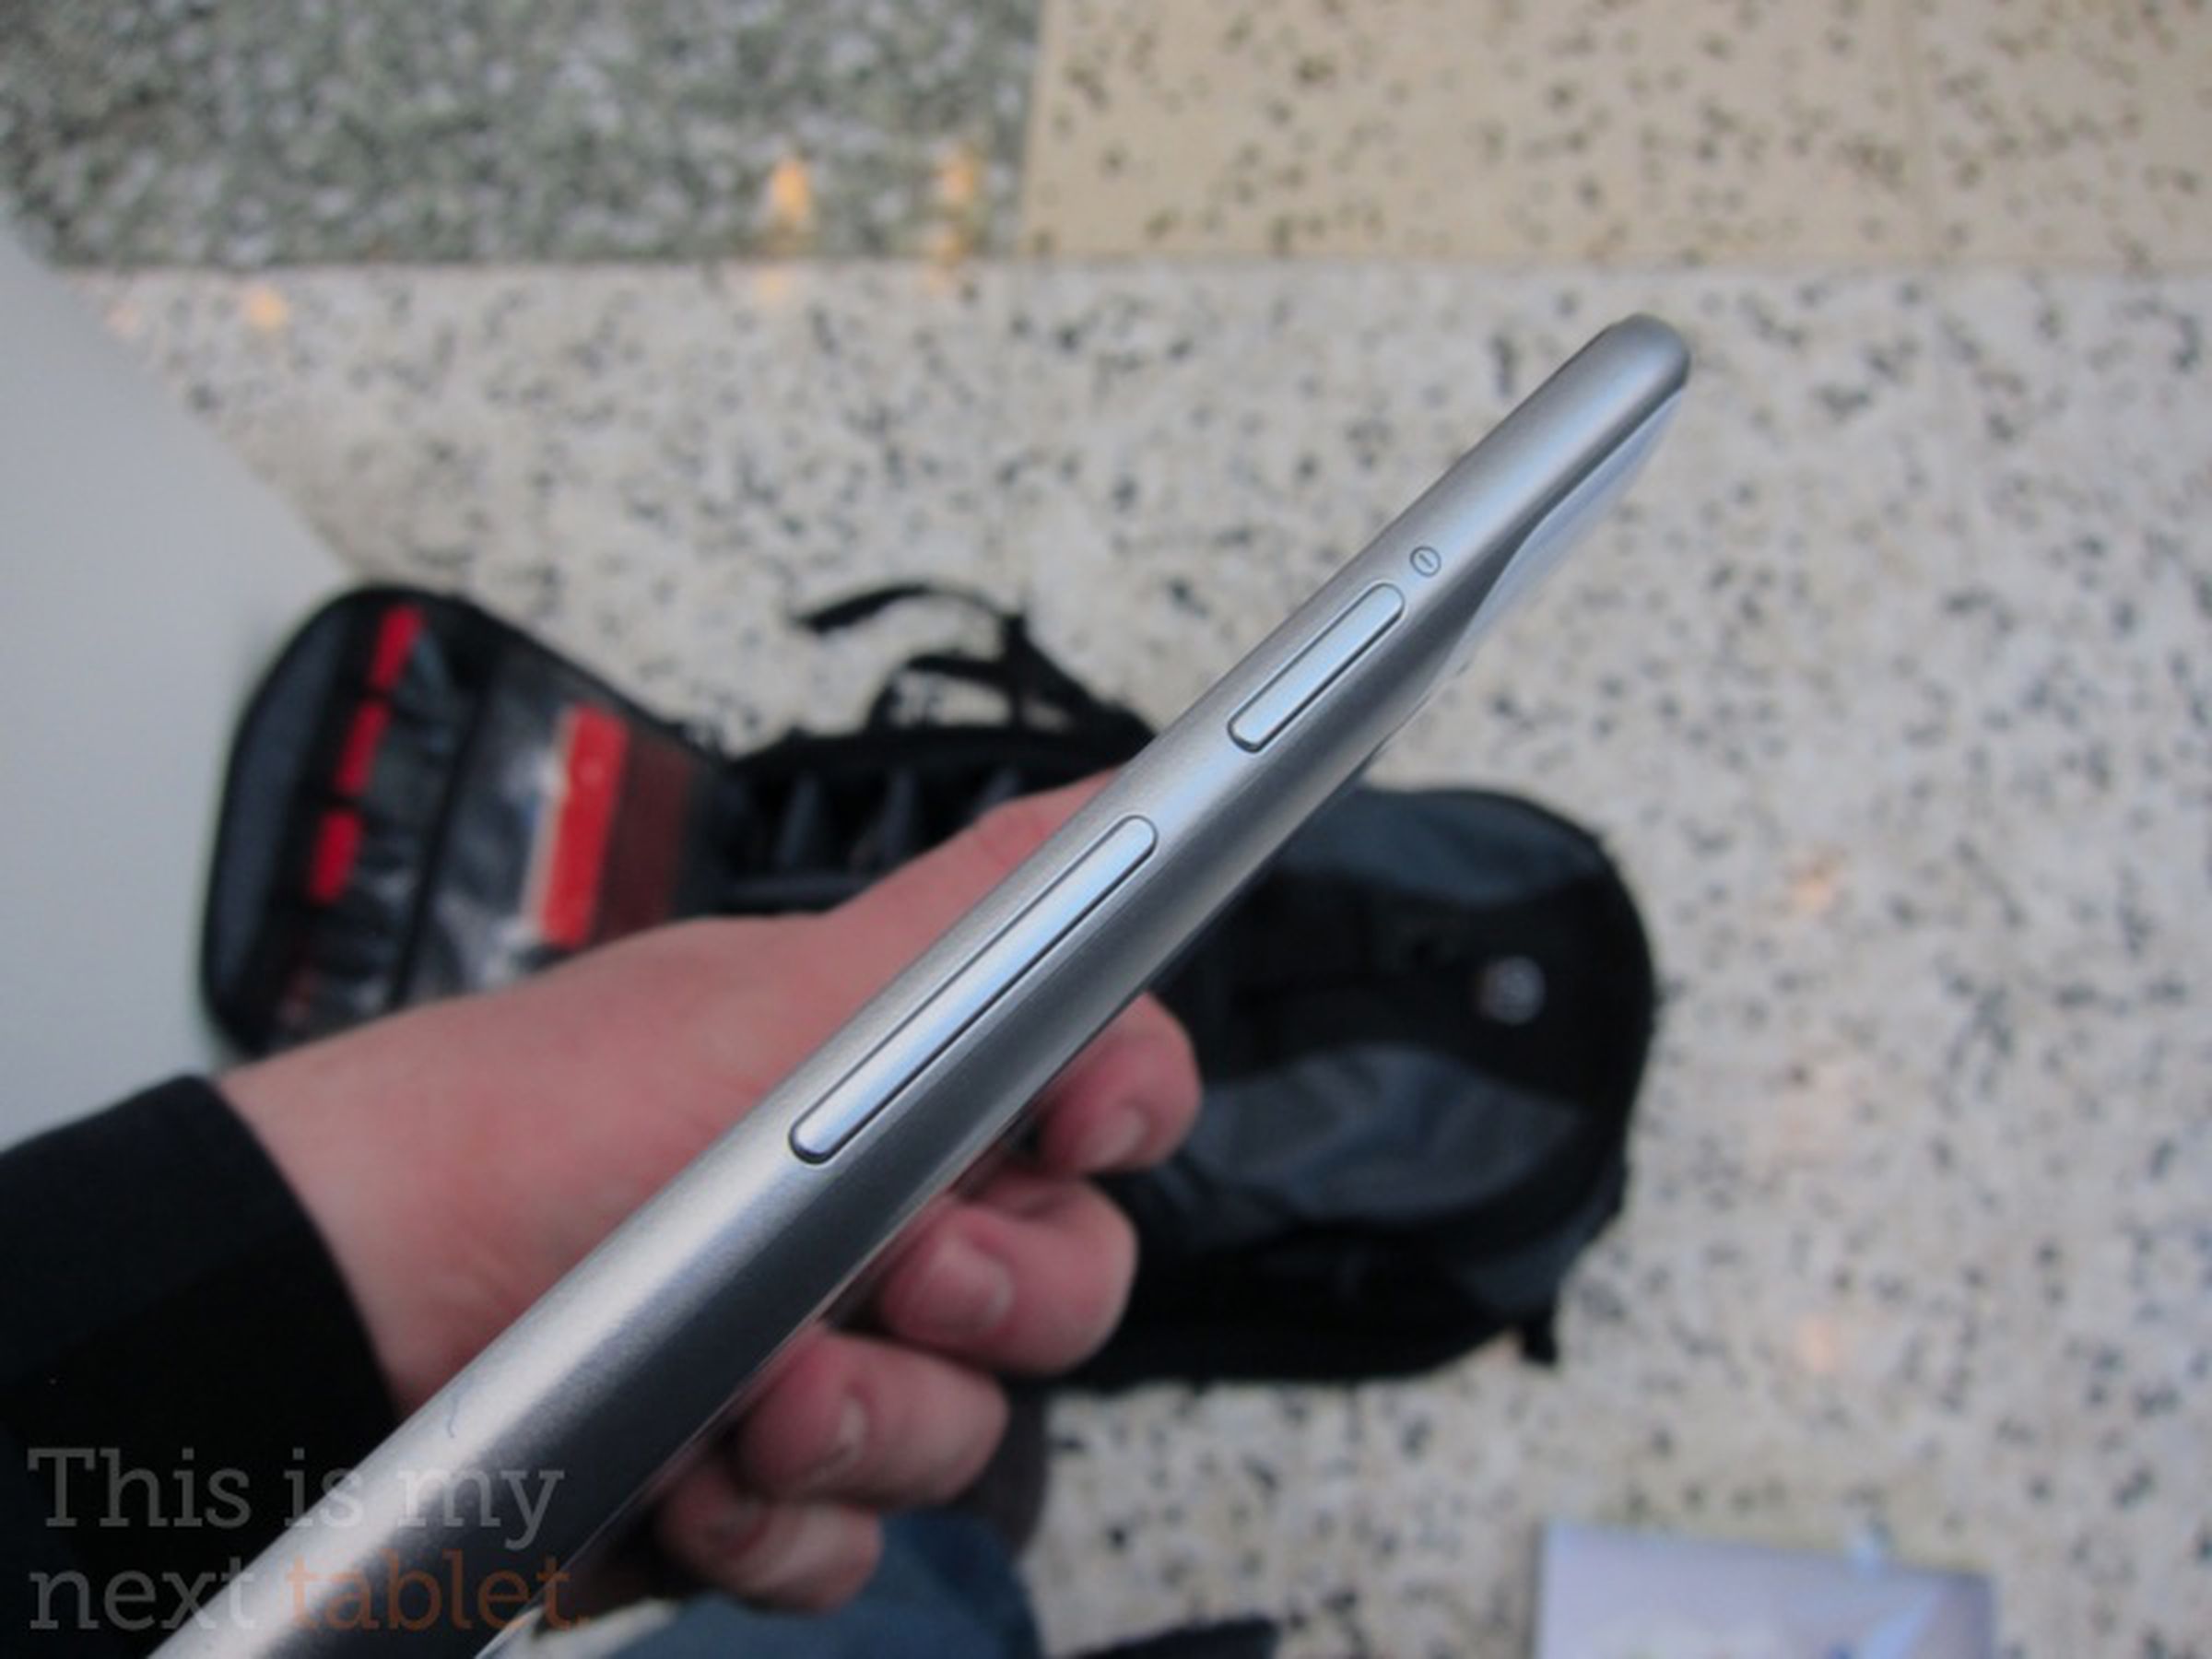 Samsung Galaxy Tab 10.1 (Google I/O Limited Edition) hands-on pictures